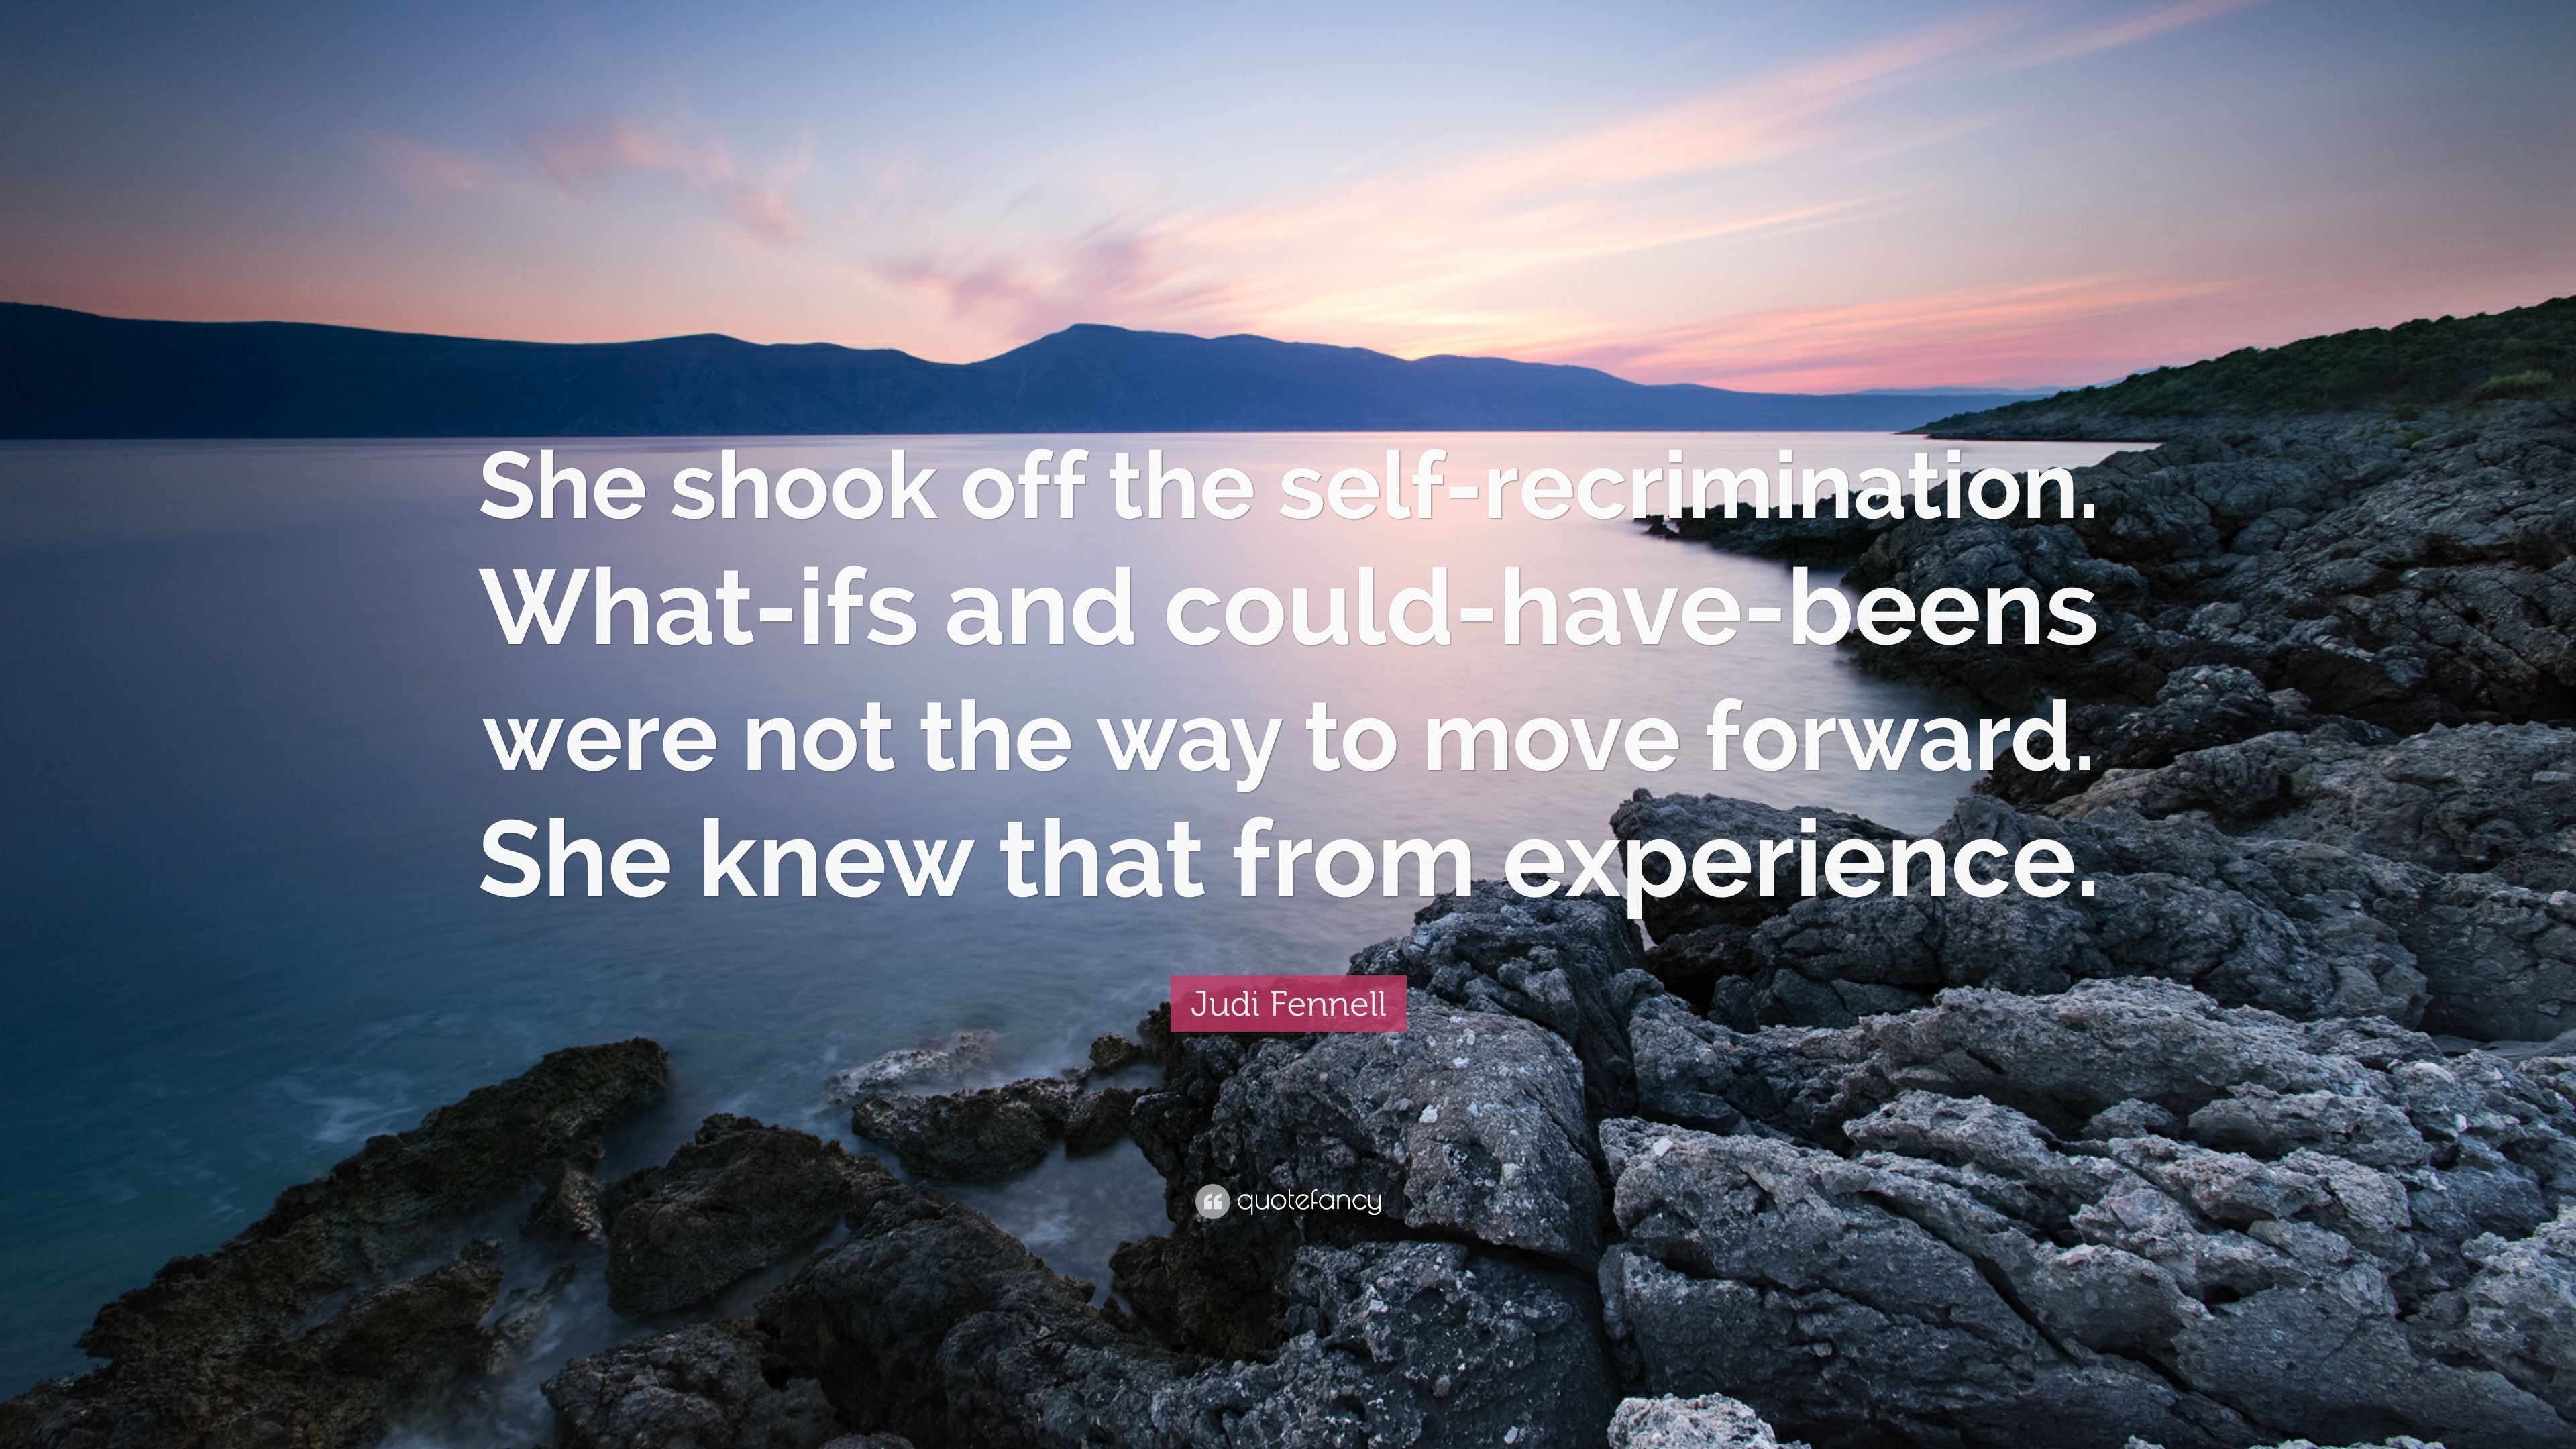 Judi Fennell Quote: “She shook off the self-recrimination. What-ifs and ...